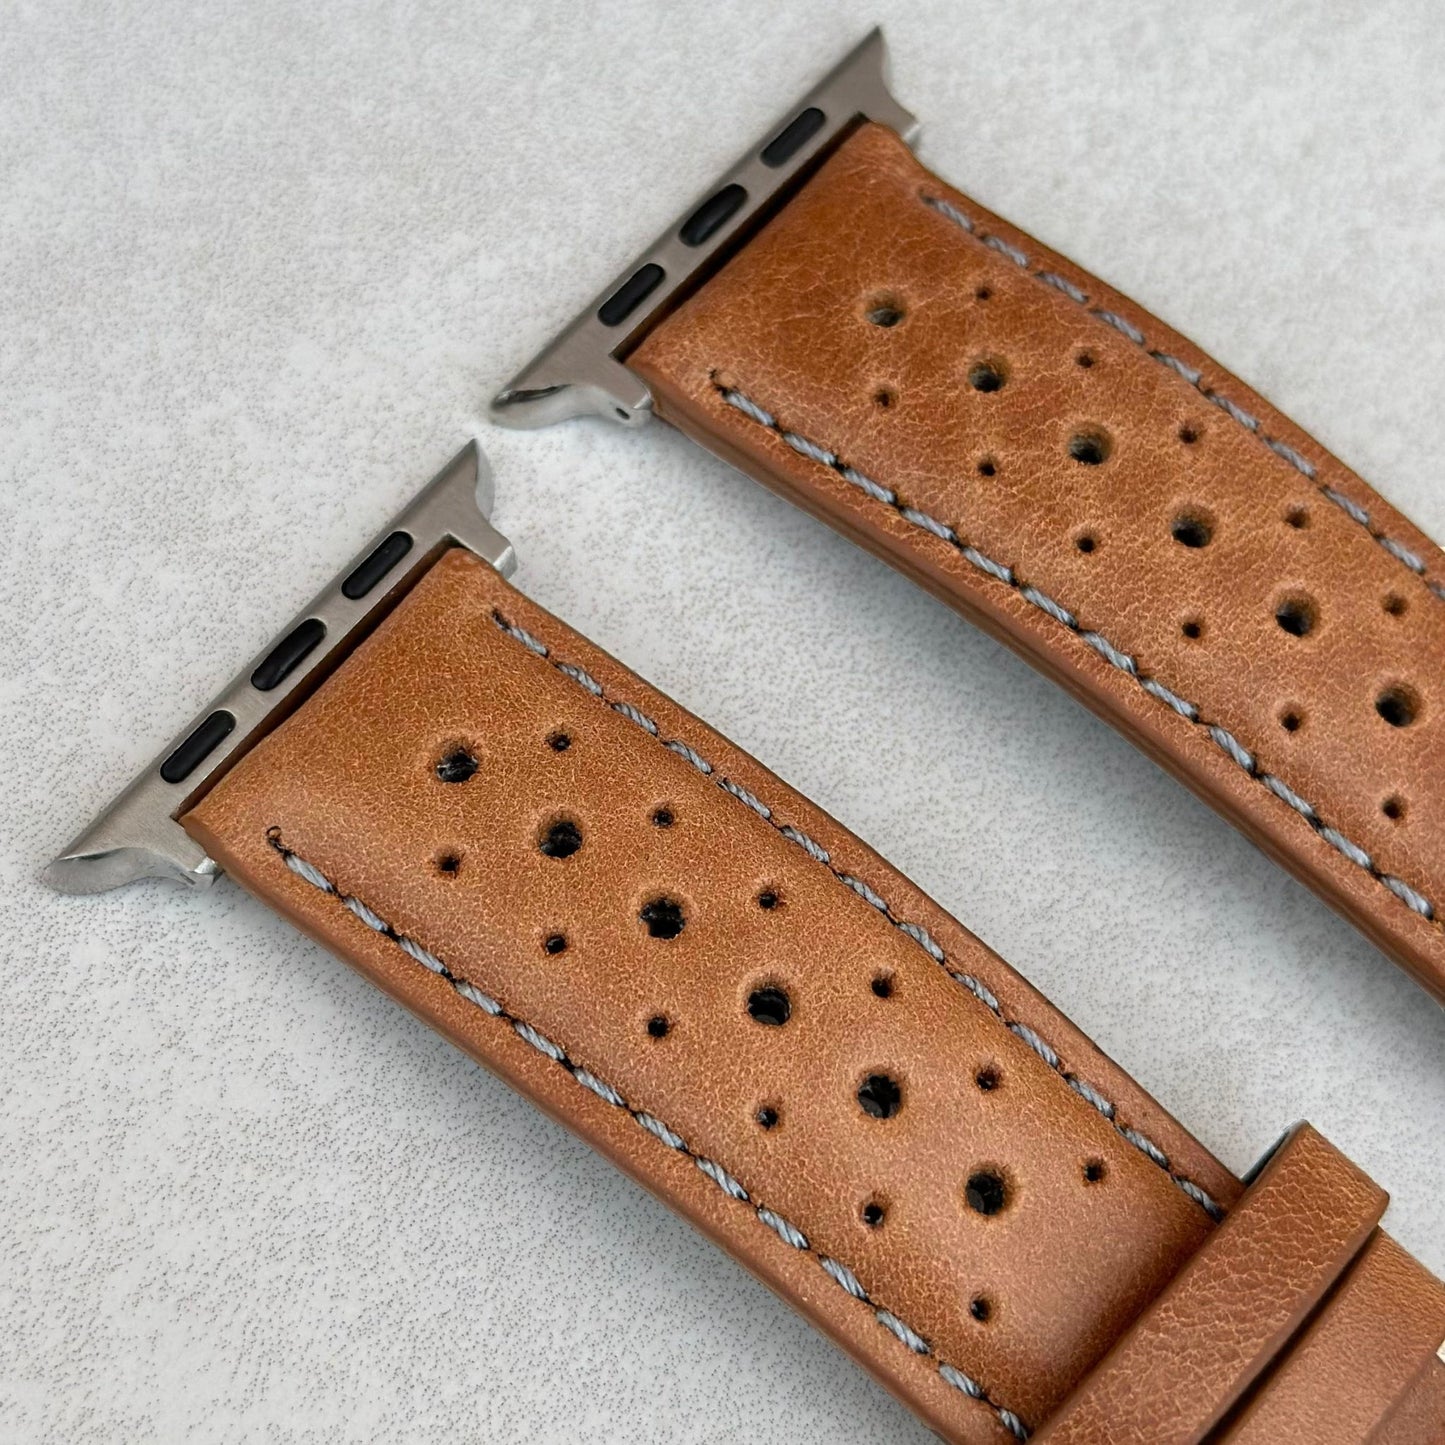 Top of the Montecarlo tan vintage rally Apple Watch Strap. Contrast grey stitching. Watch And Strap